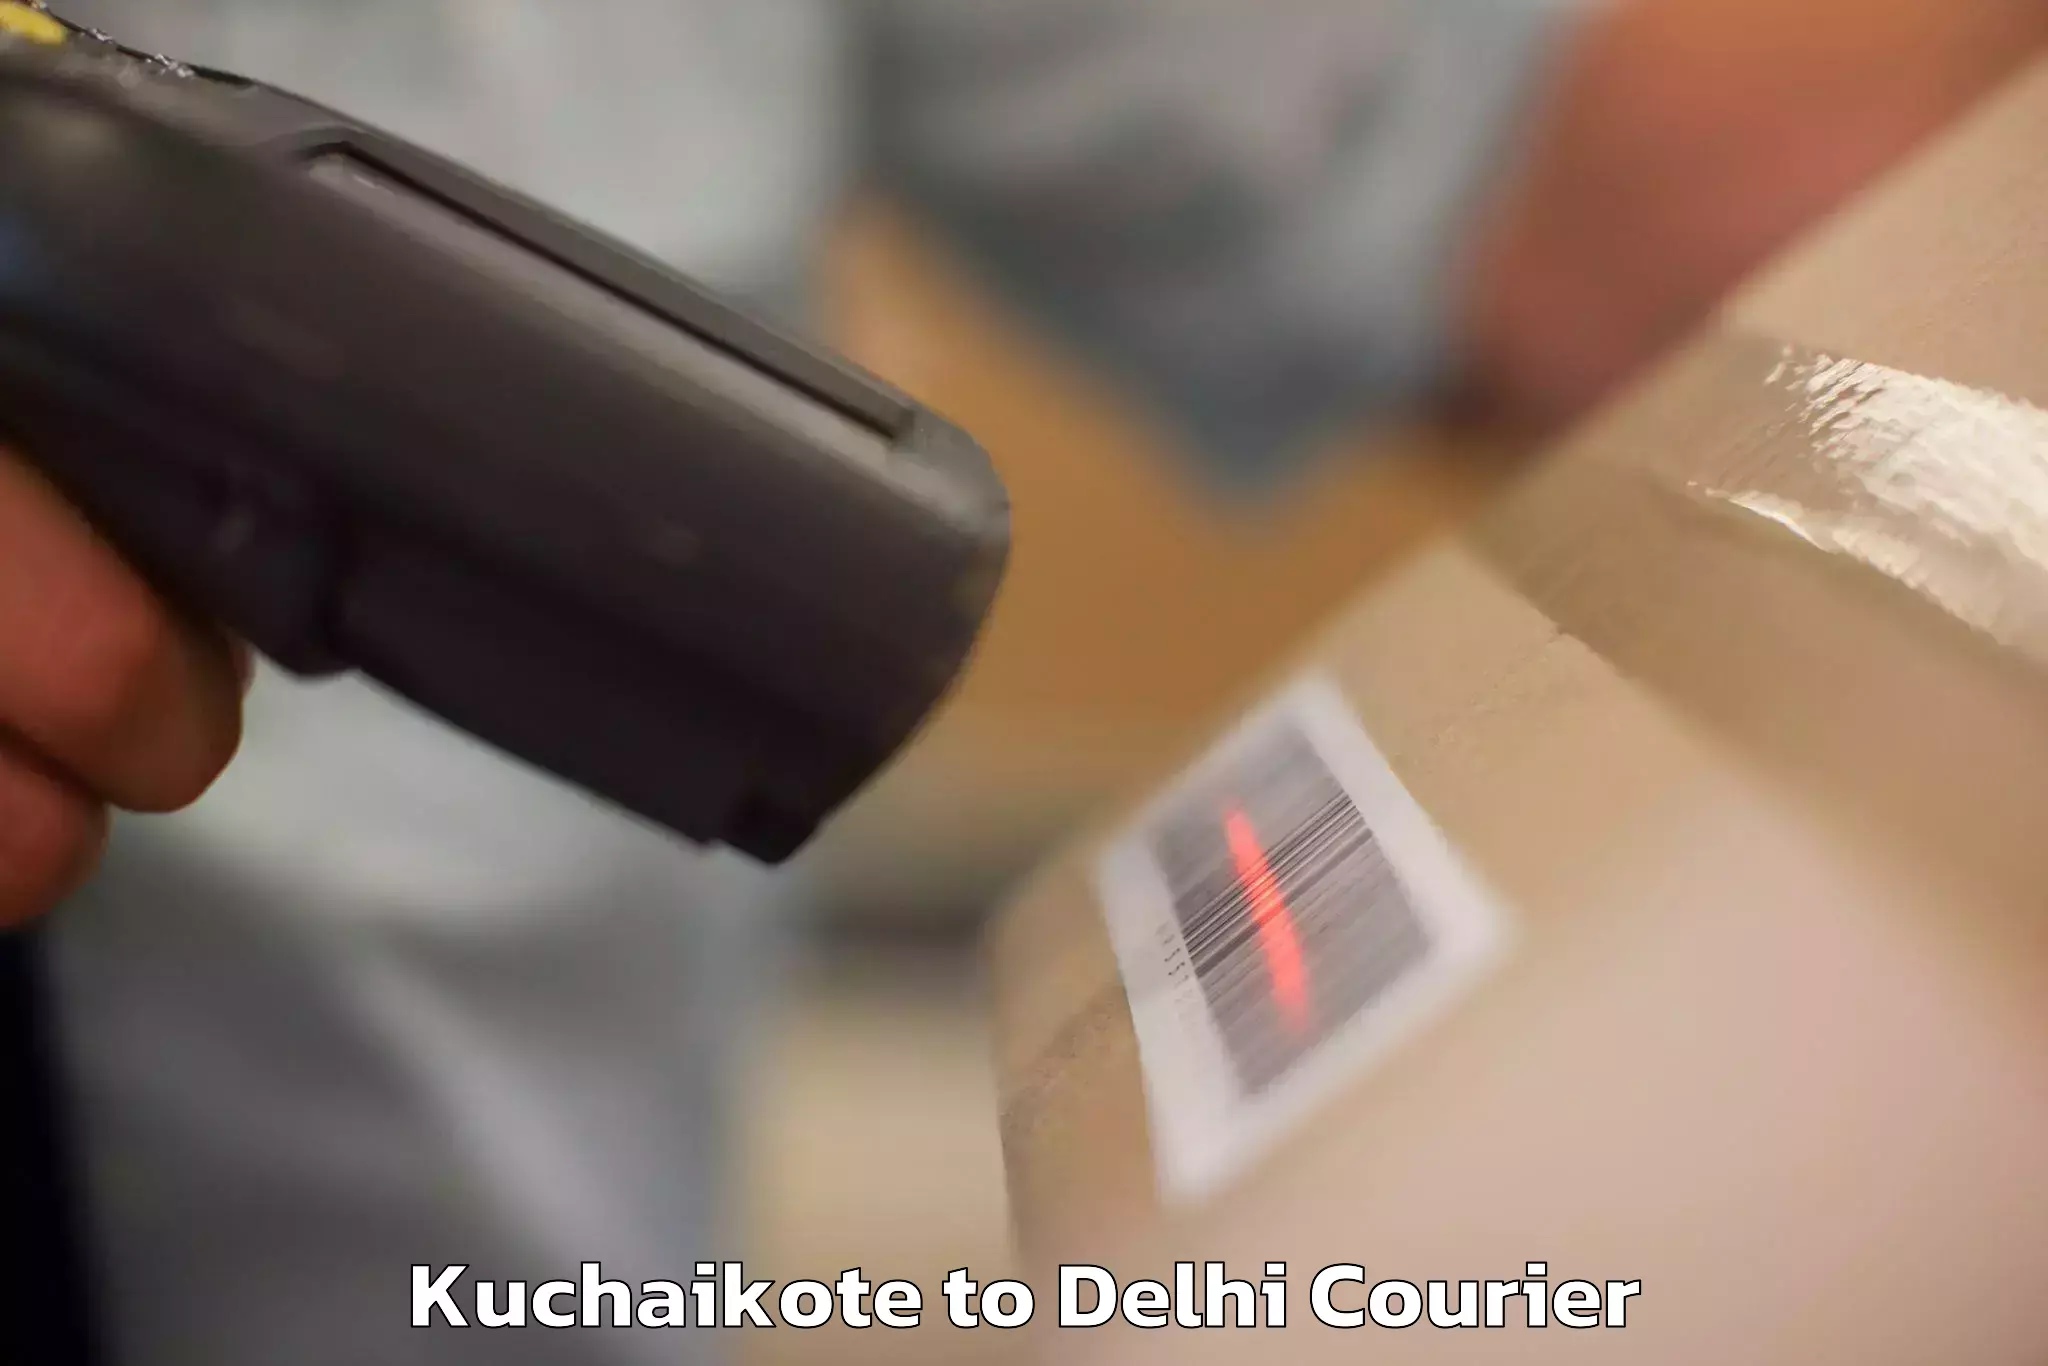 Baggage relocation service Kuchaikote to NCR